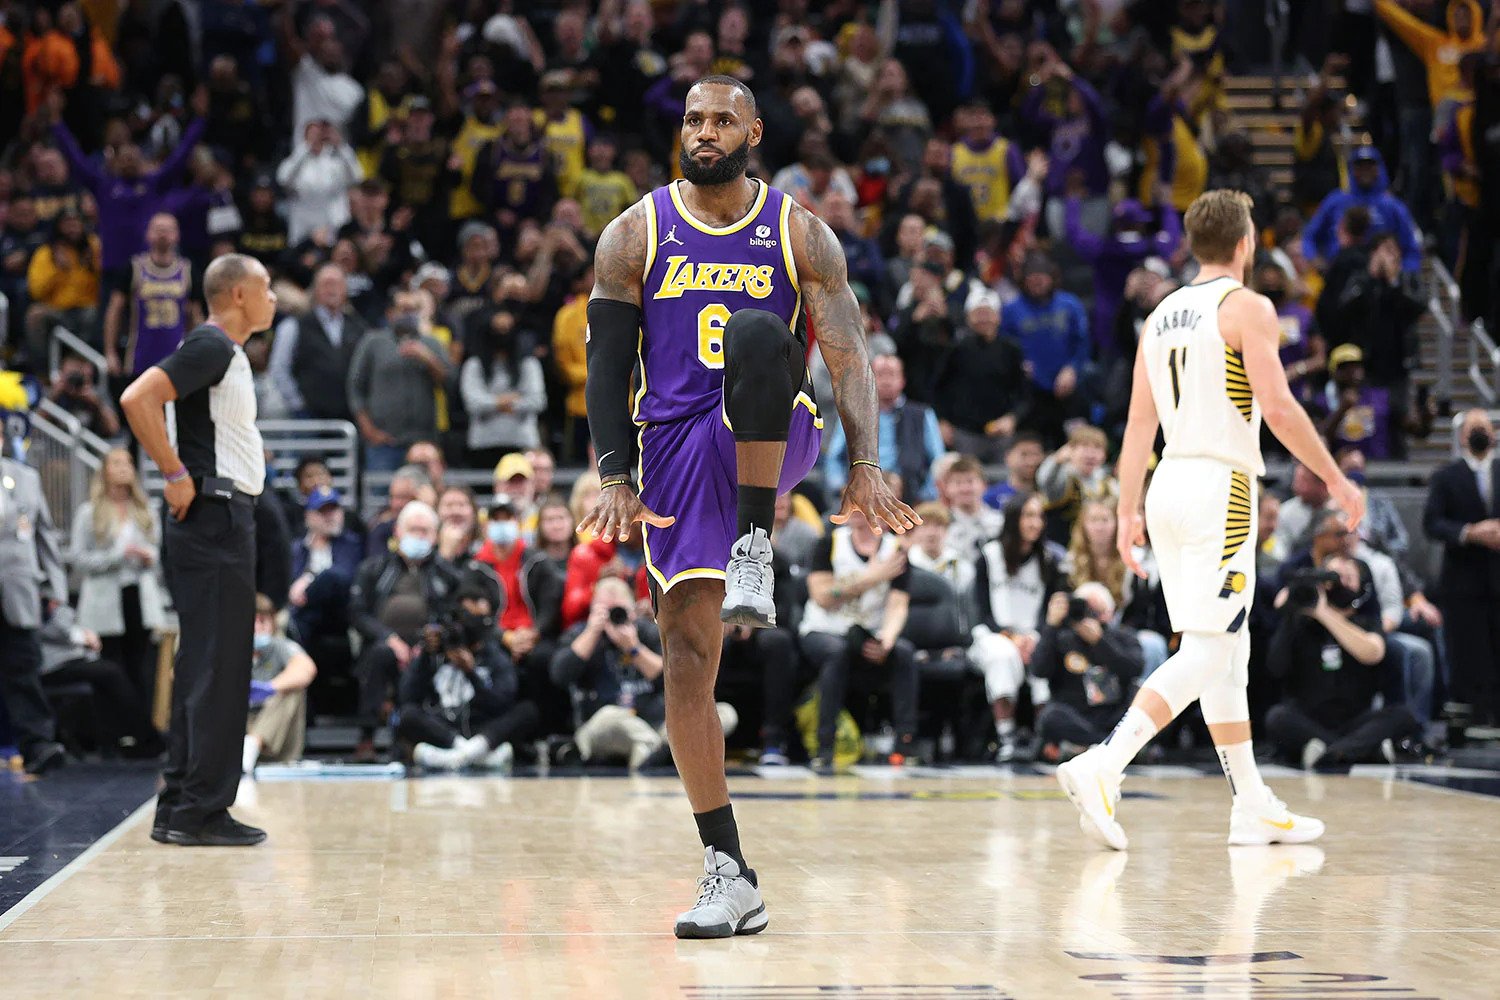 LeBron James anchors Lakers’ defense, hits clutch shots to lead win over Pacers